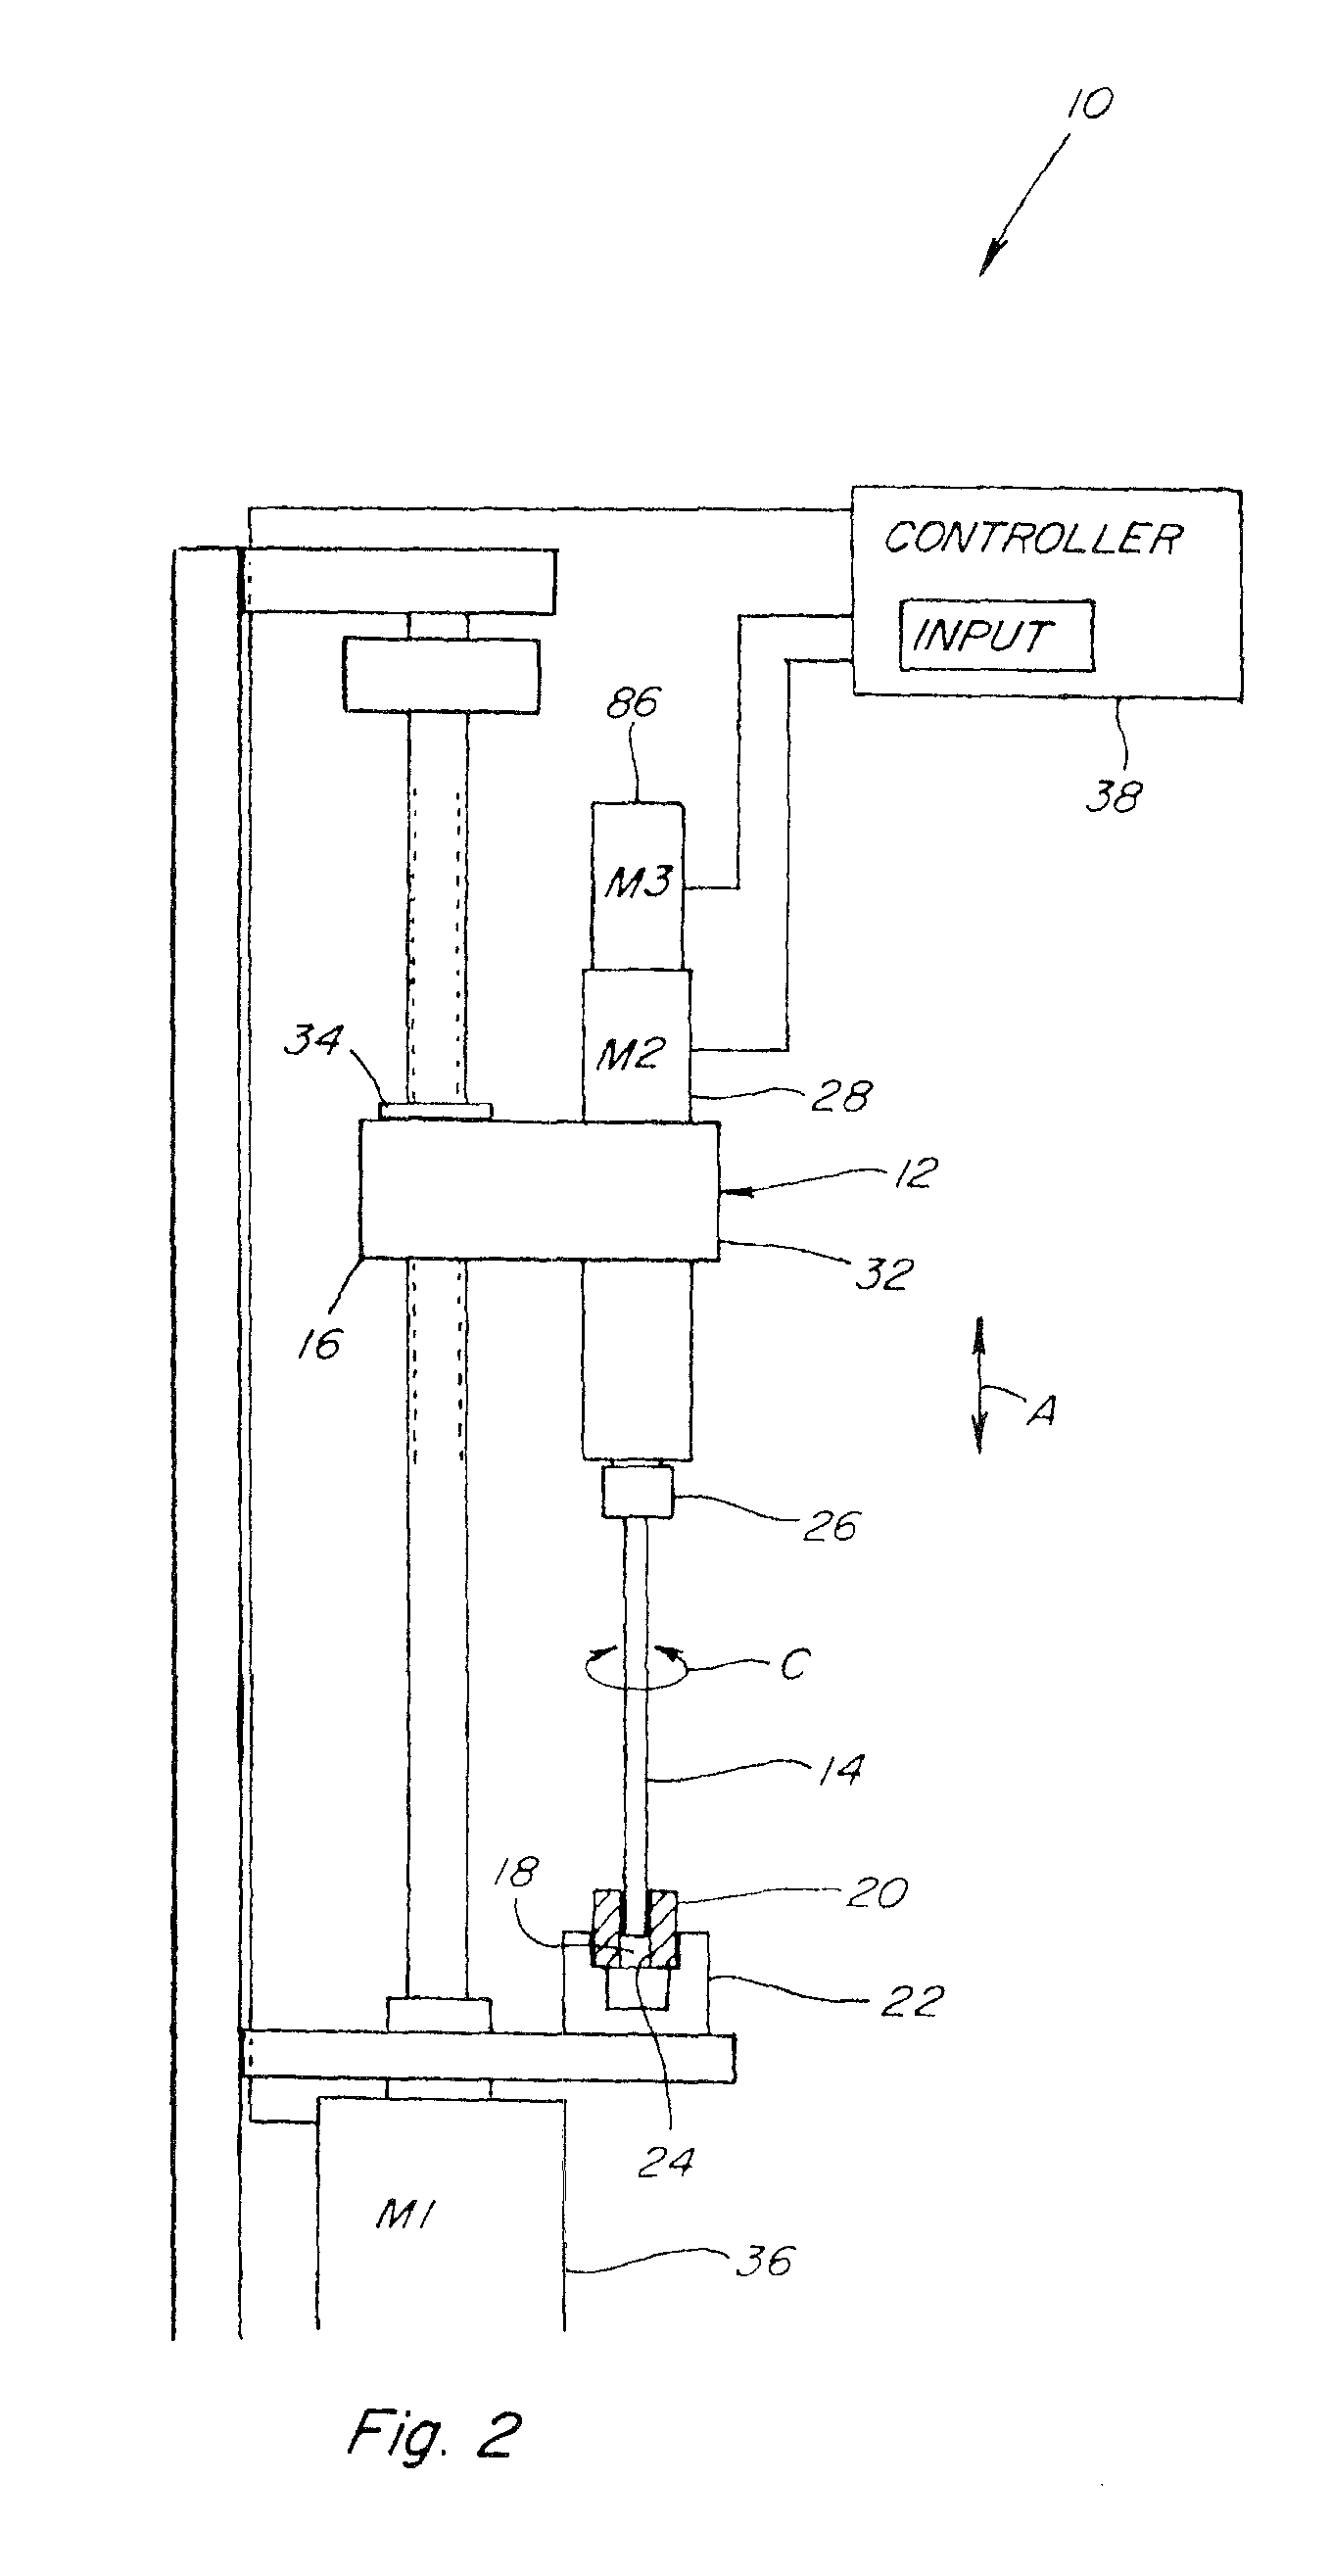 Honing feed system and method employing rapid tool advancement and feed force signal conditioning